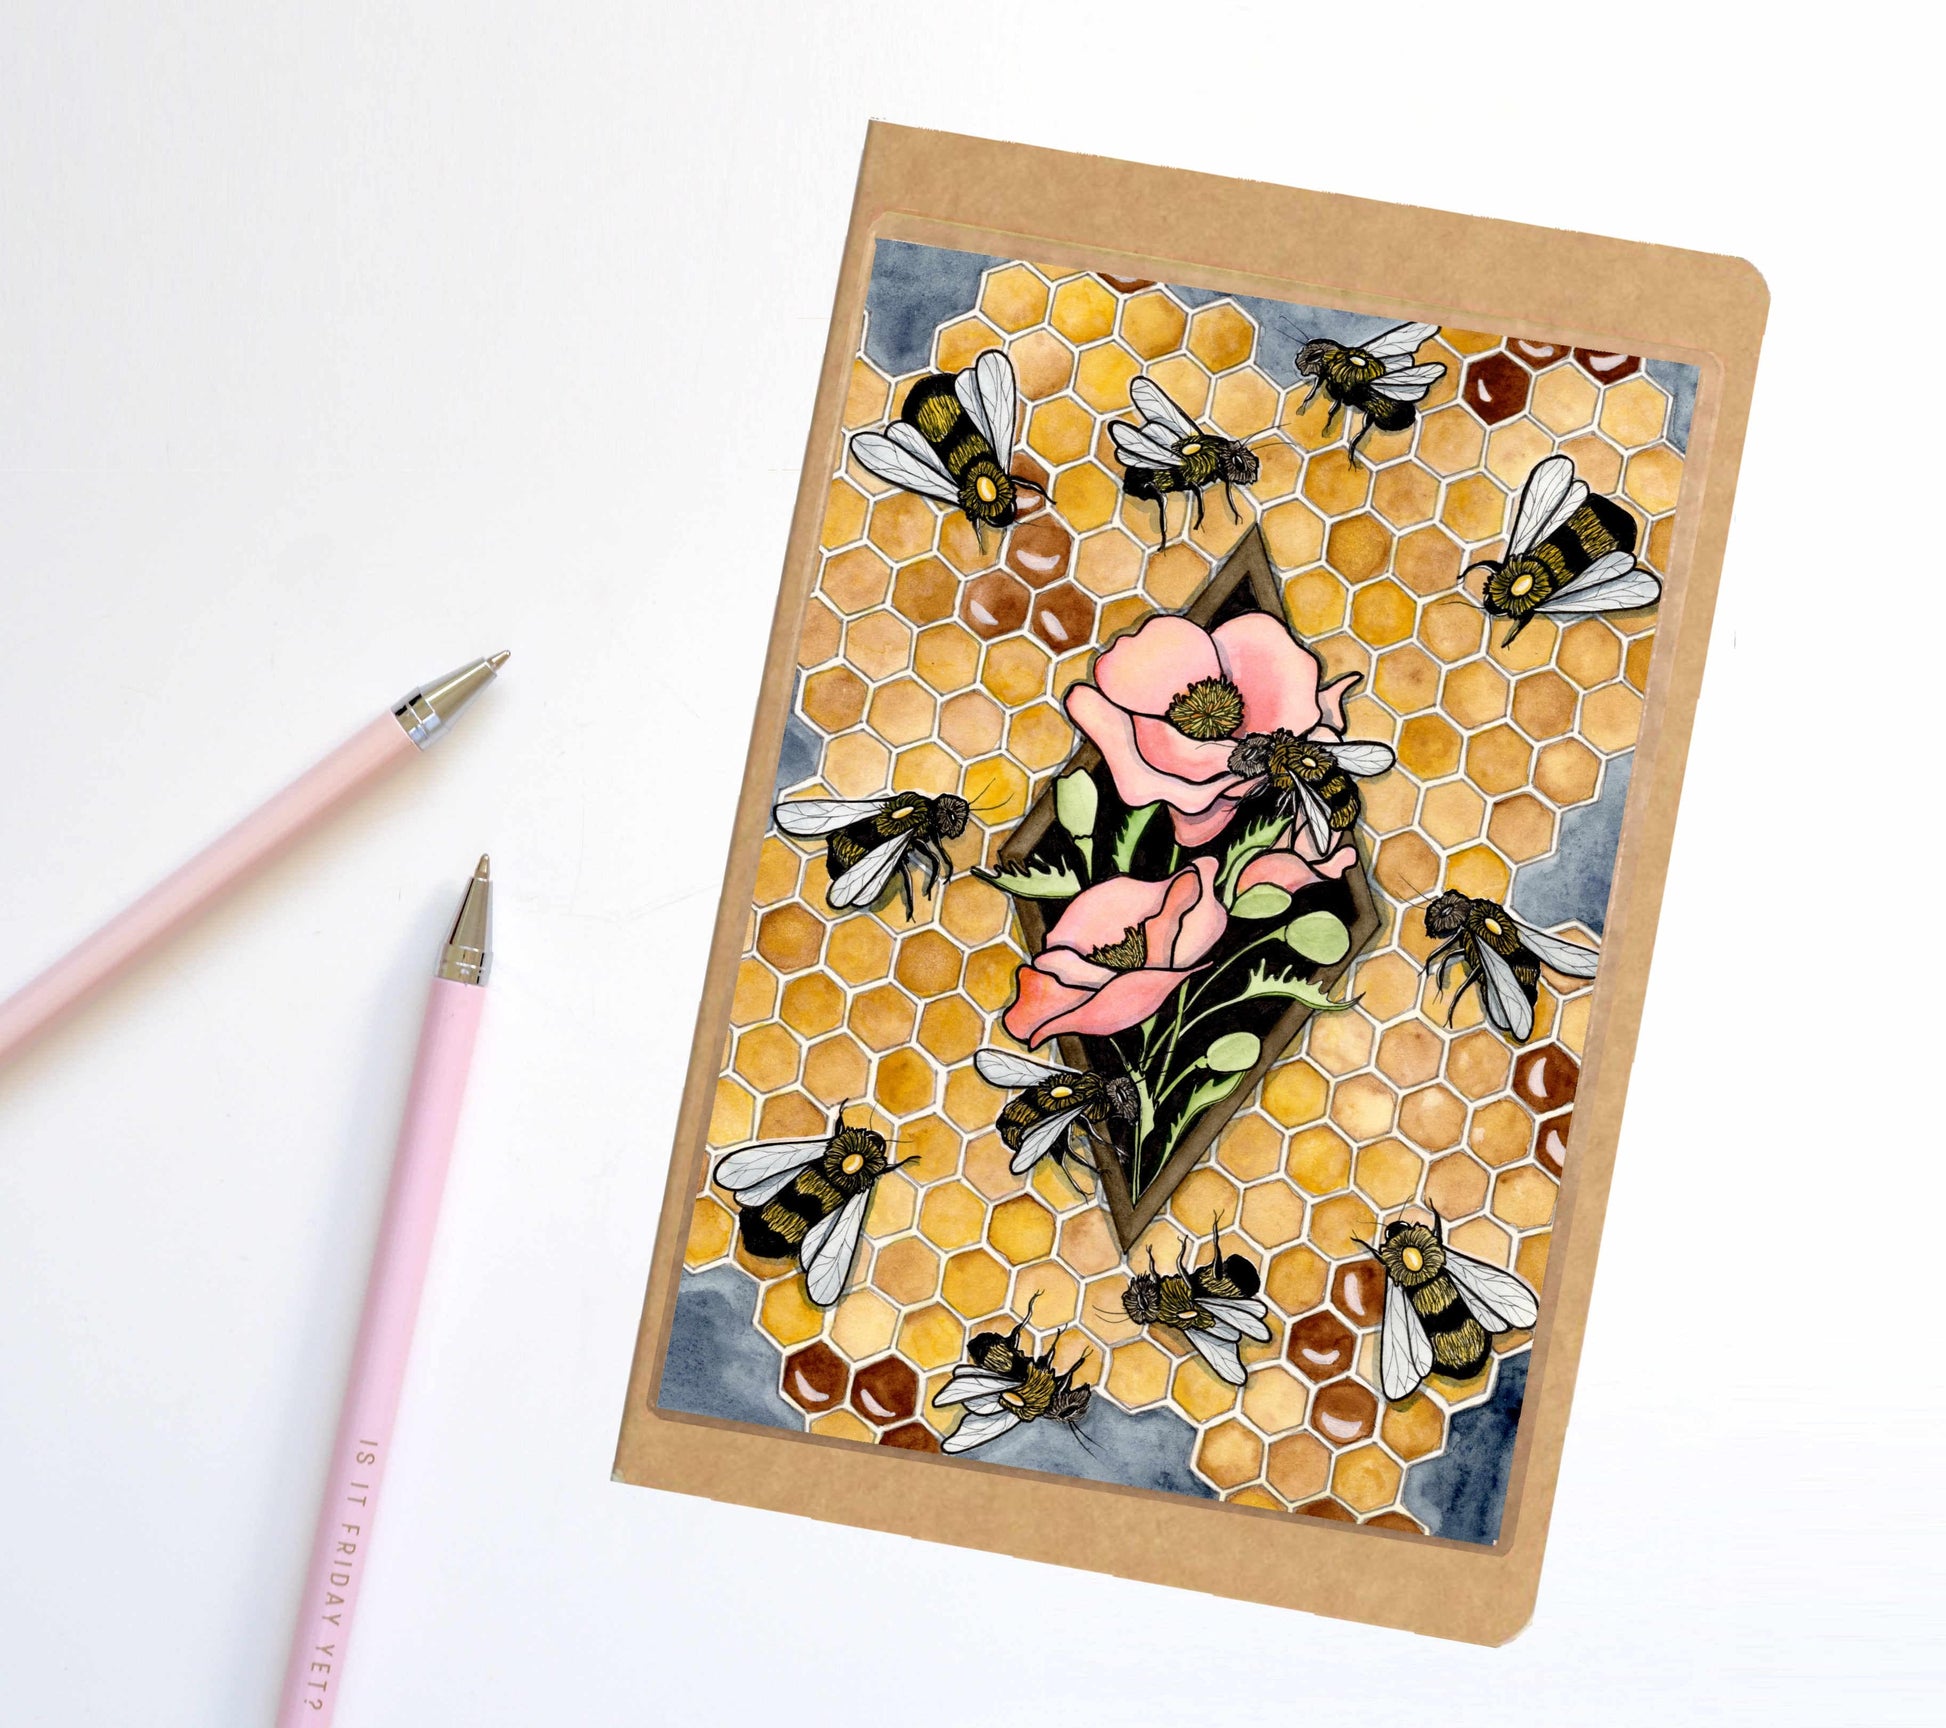 PinkPolish Design Notebook "Bee Repetition" Insect Inspired Notebook / Sketchbook / Journal